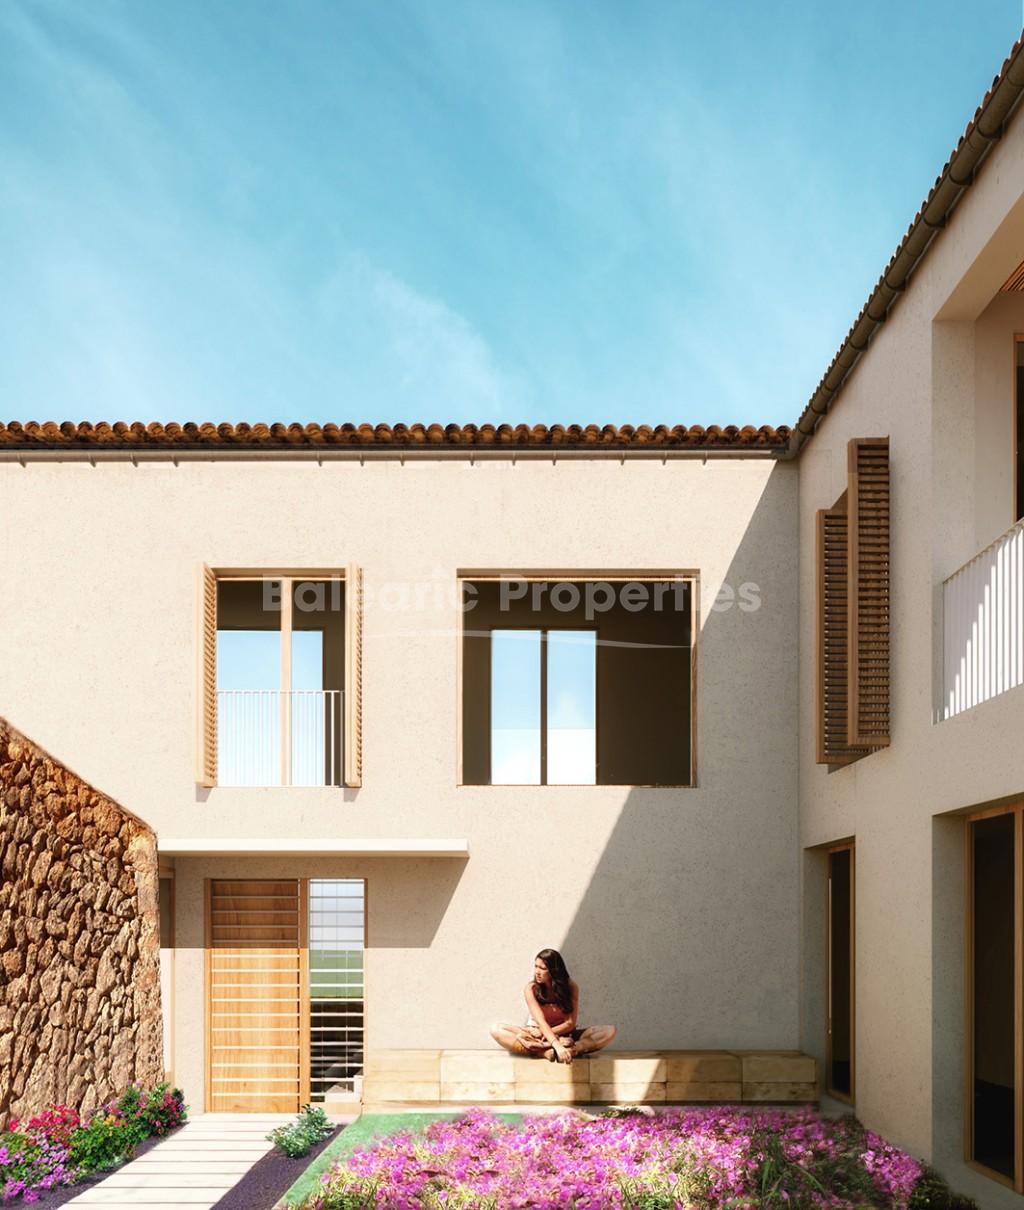 Large plot of land with approved project to build a 4 bedroom villa for sale near Algaida, Mallorca